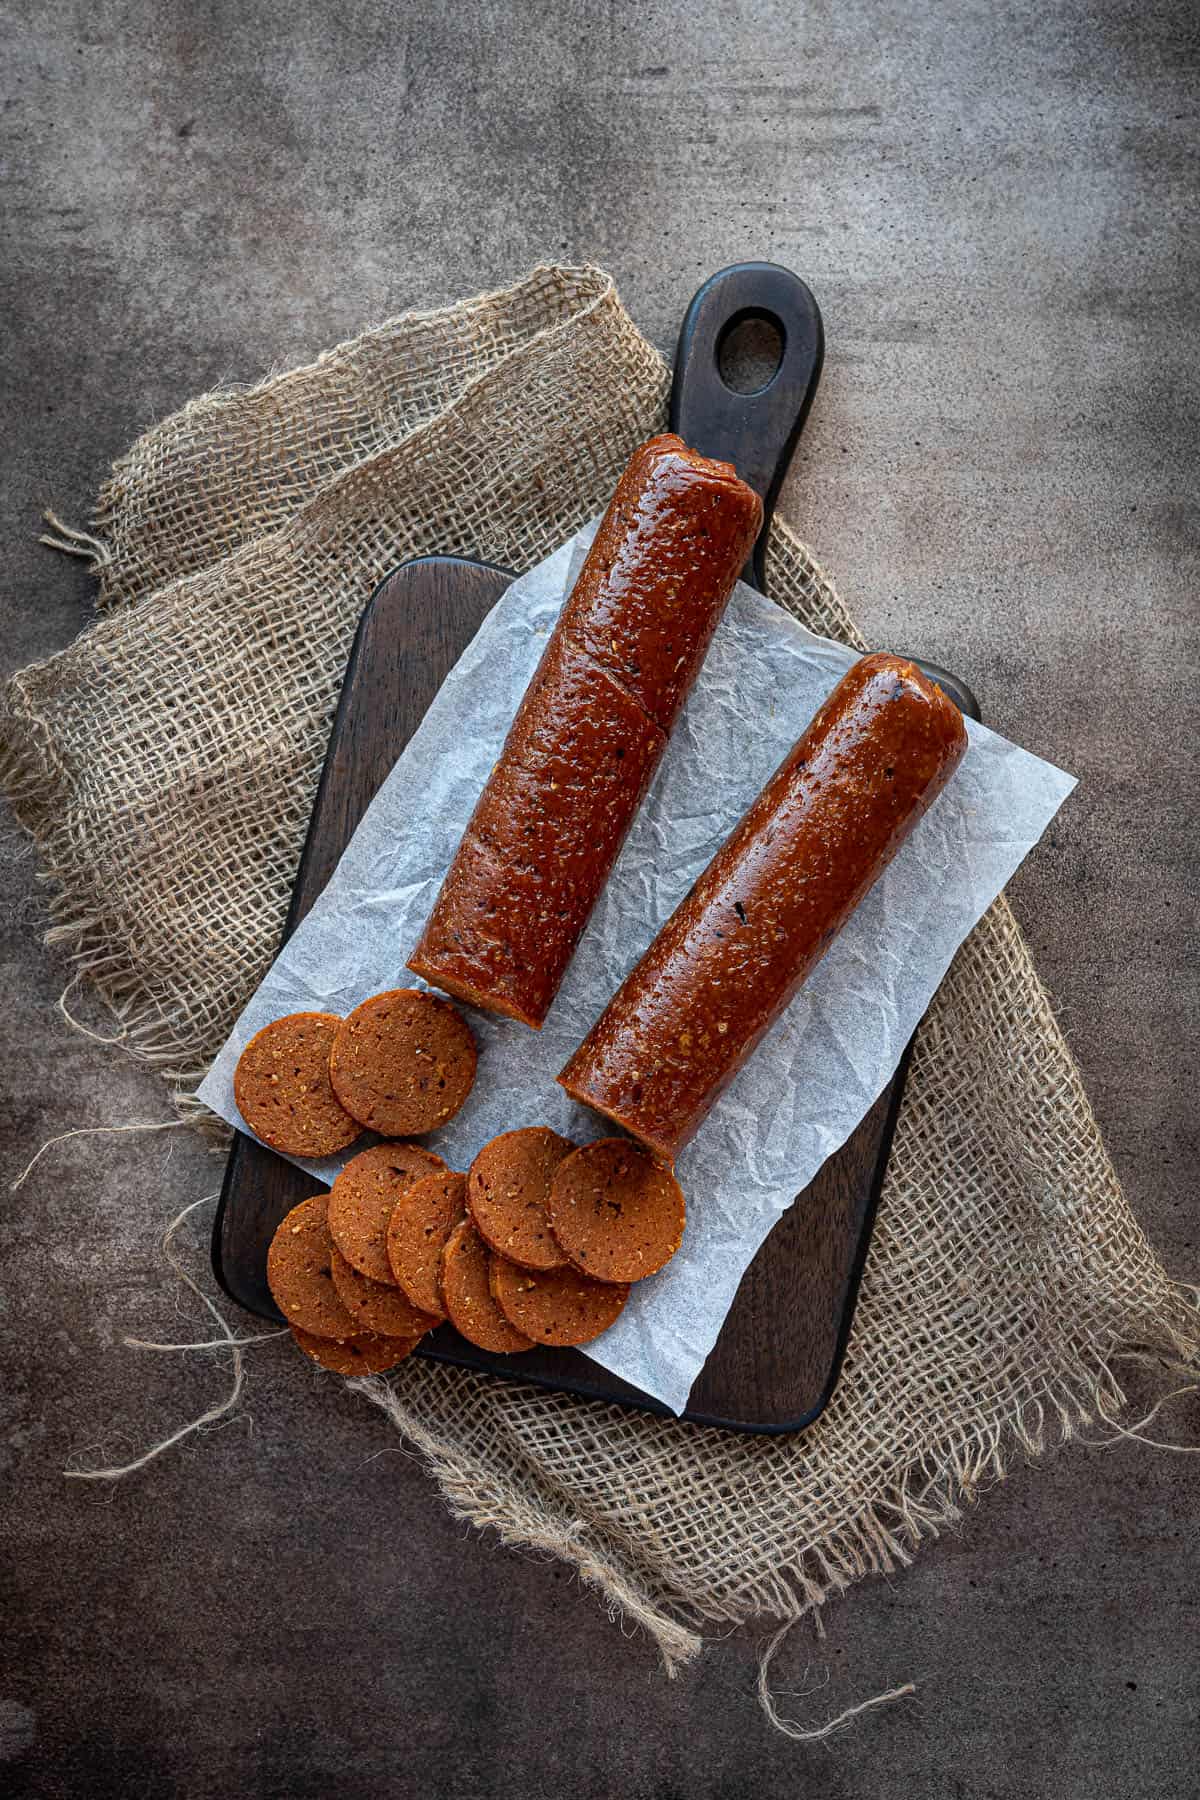 Two seitan pepperoni sausages on a wooden serving board.